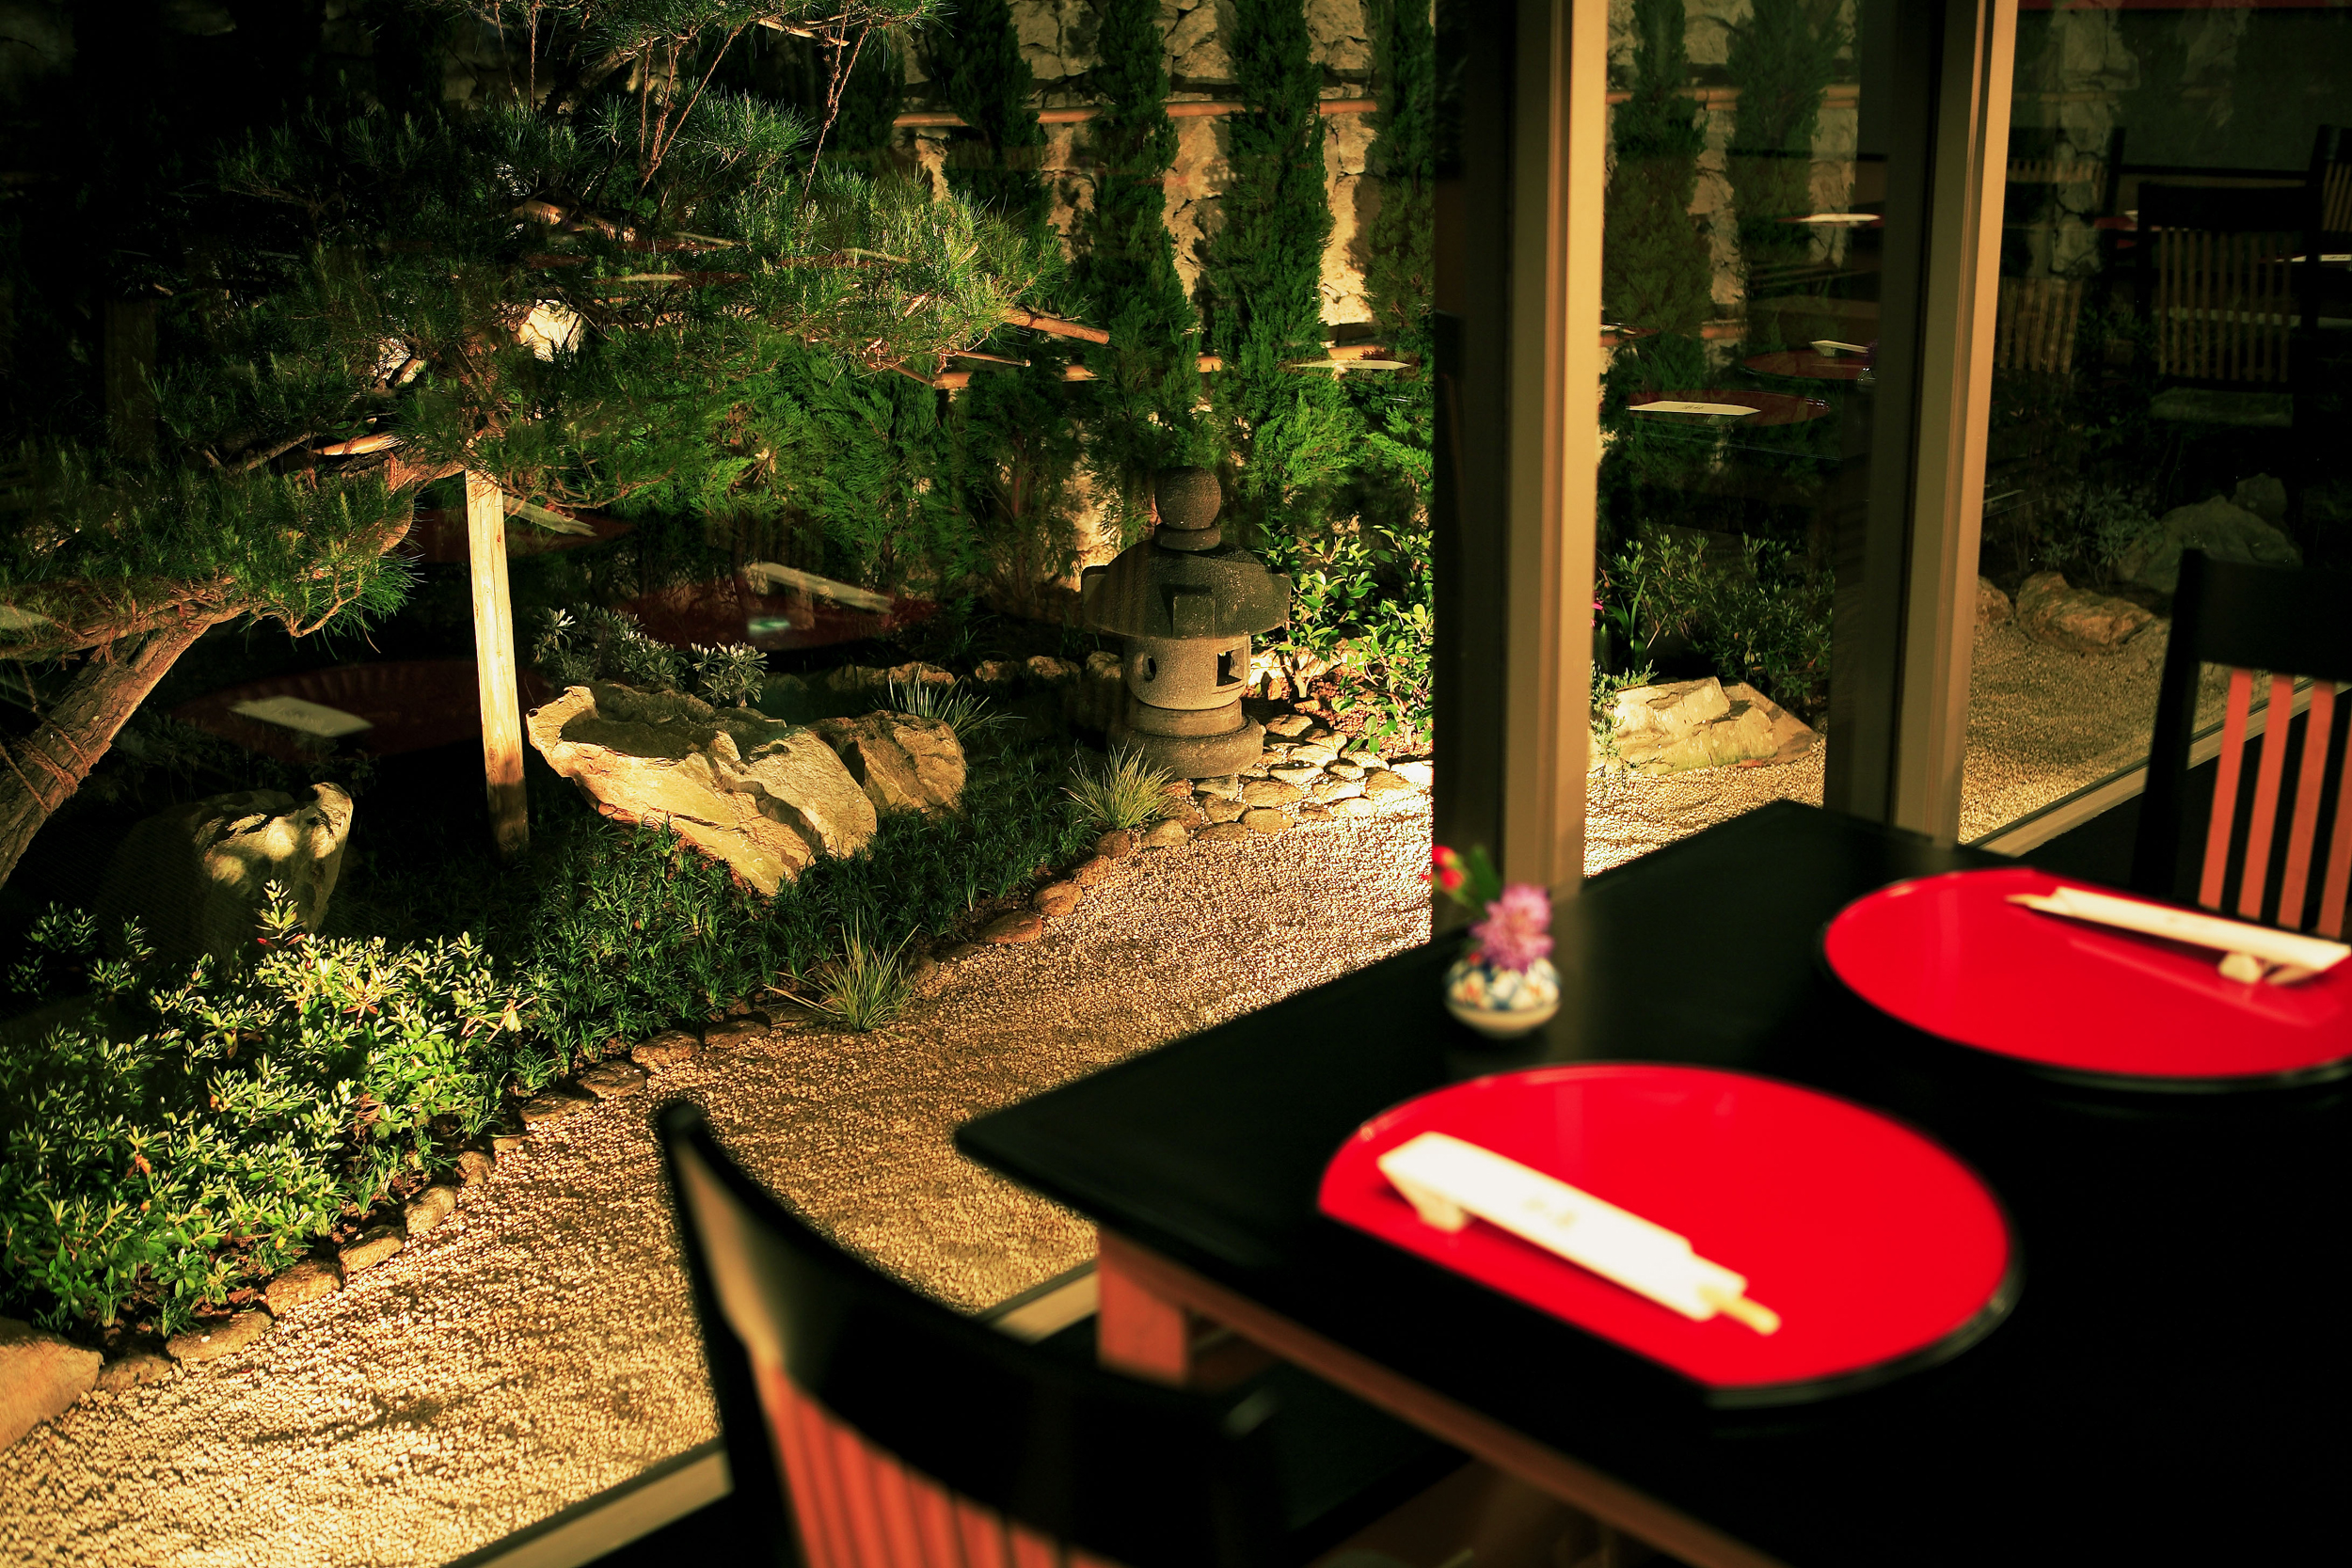 Enjoy seasonal fresh Japanese food] <br/>Thumbnail of a relaxing dinner time at a hotel